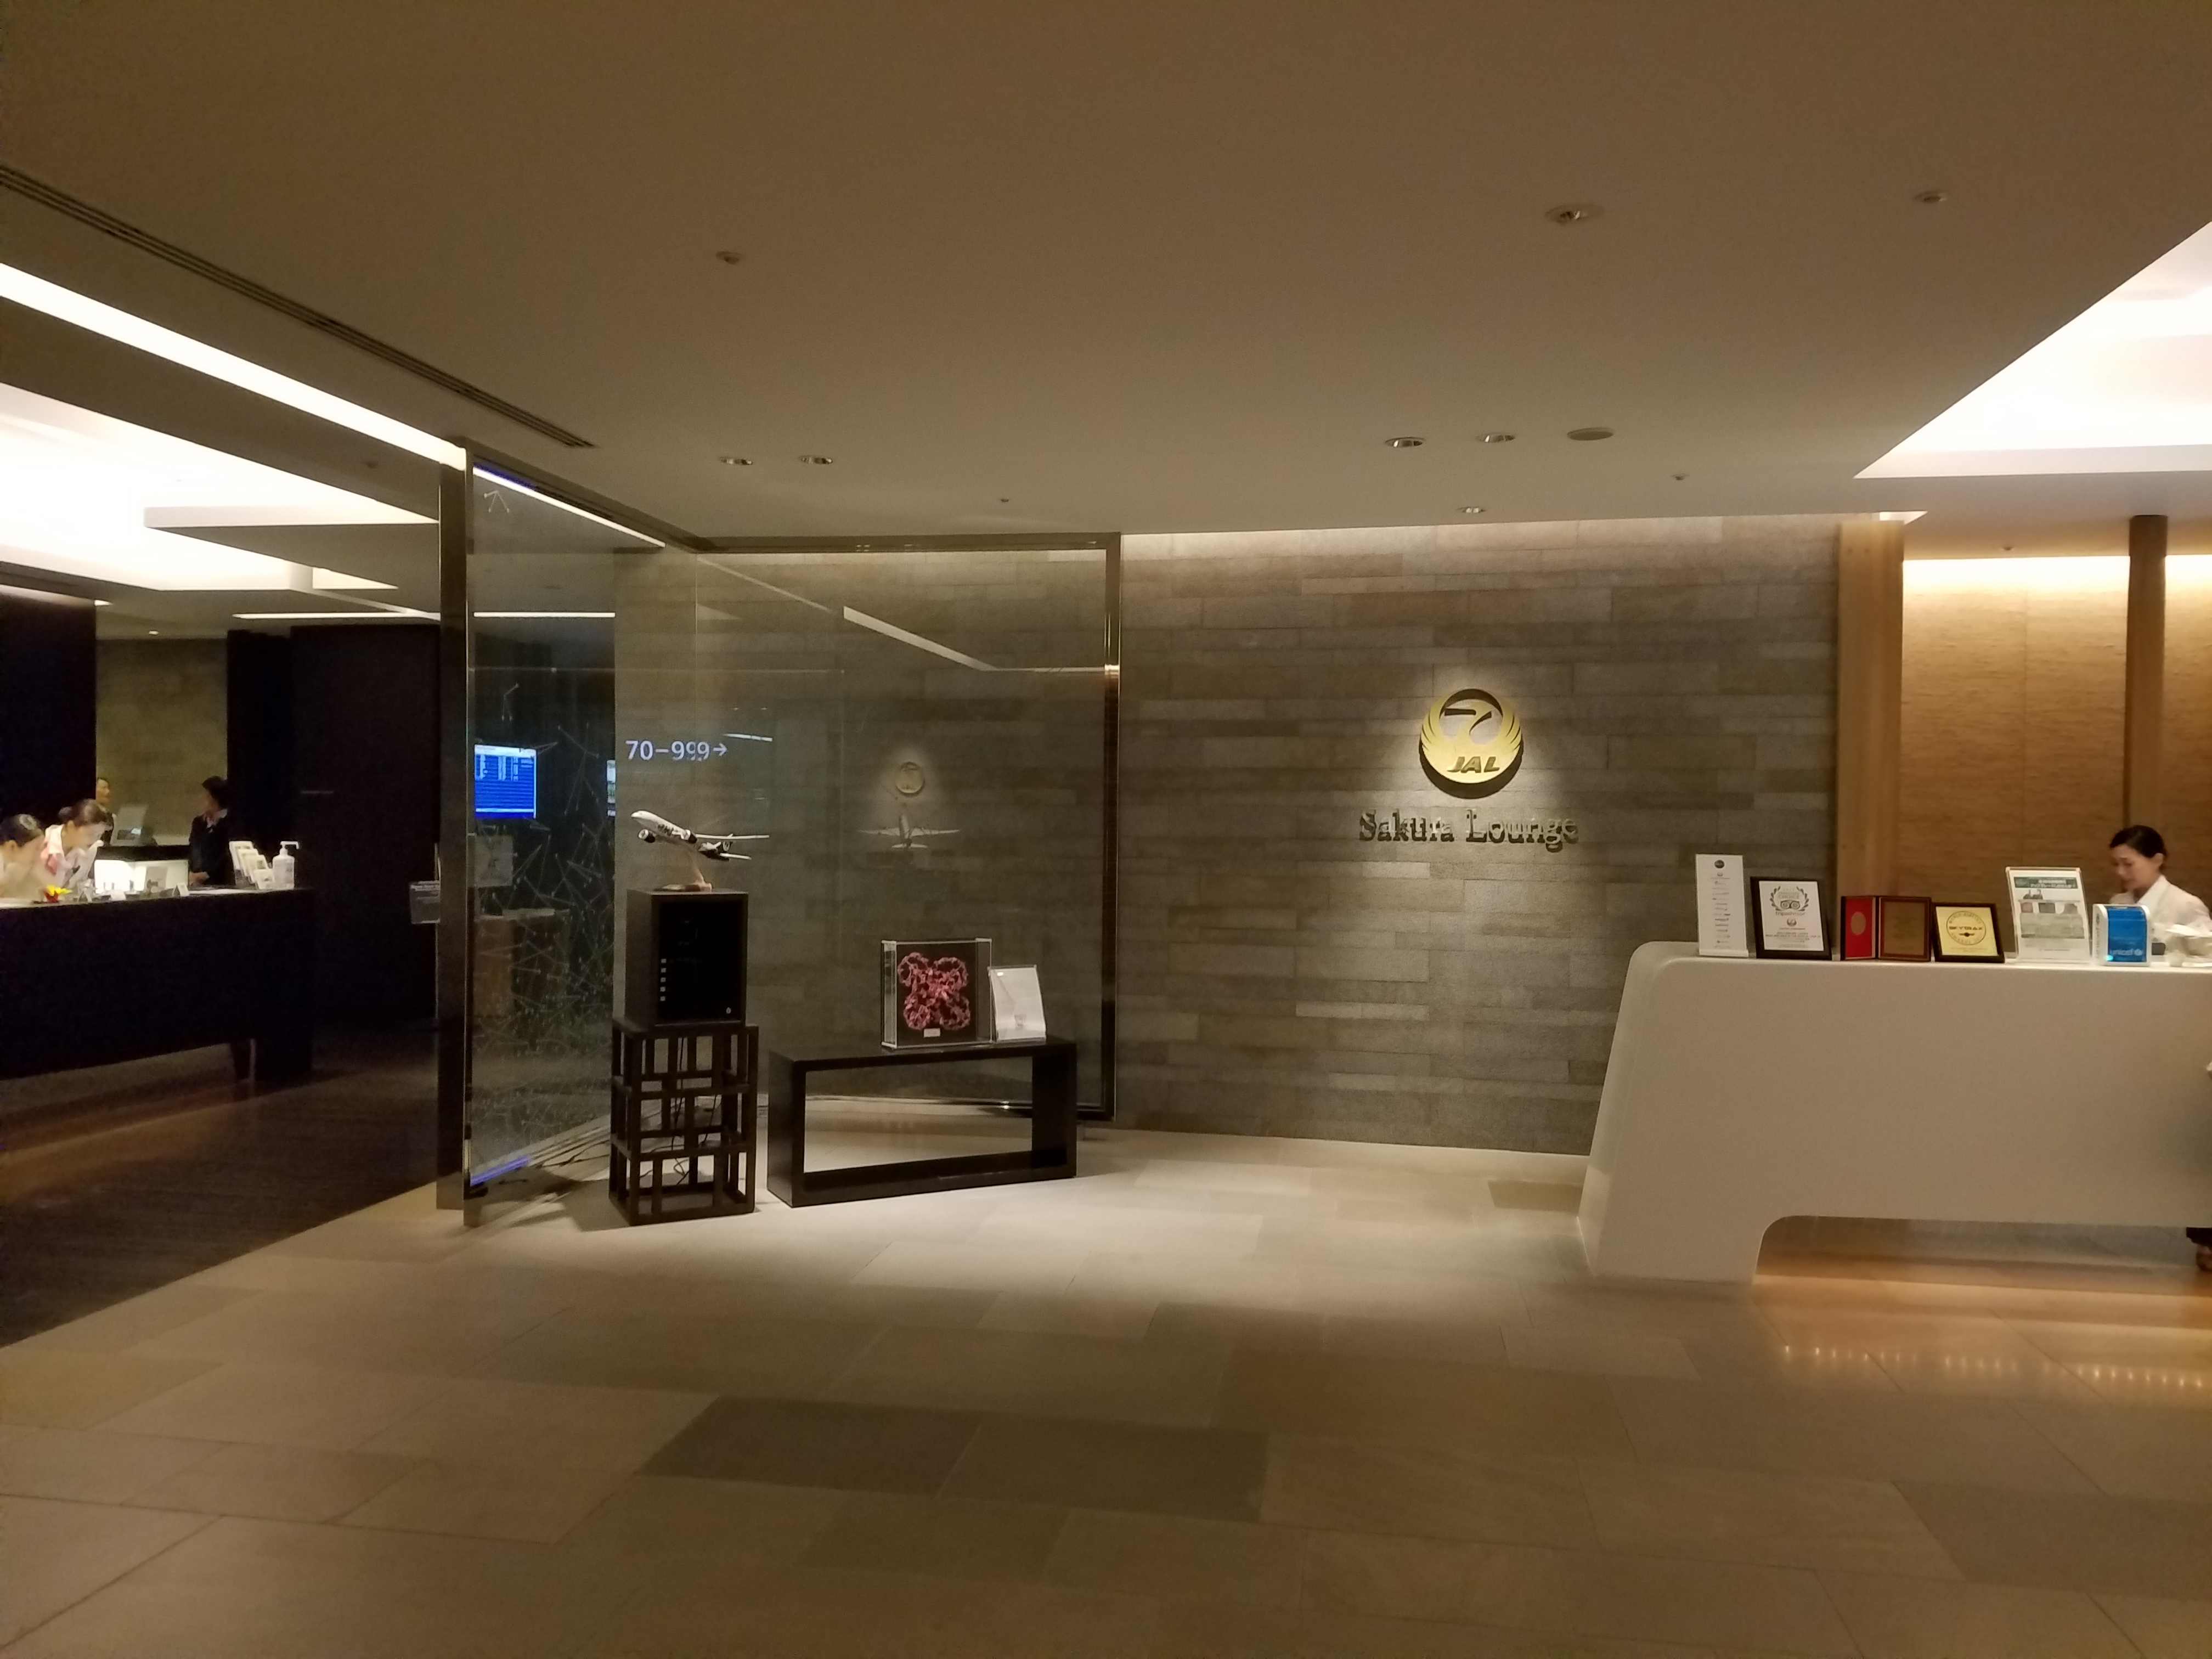 Japan Airlines first class lounge Tokyo Narita airport